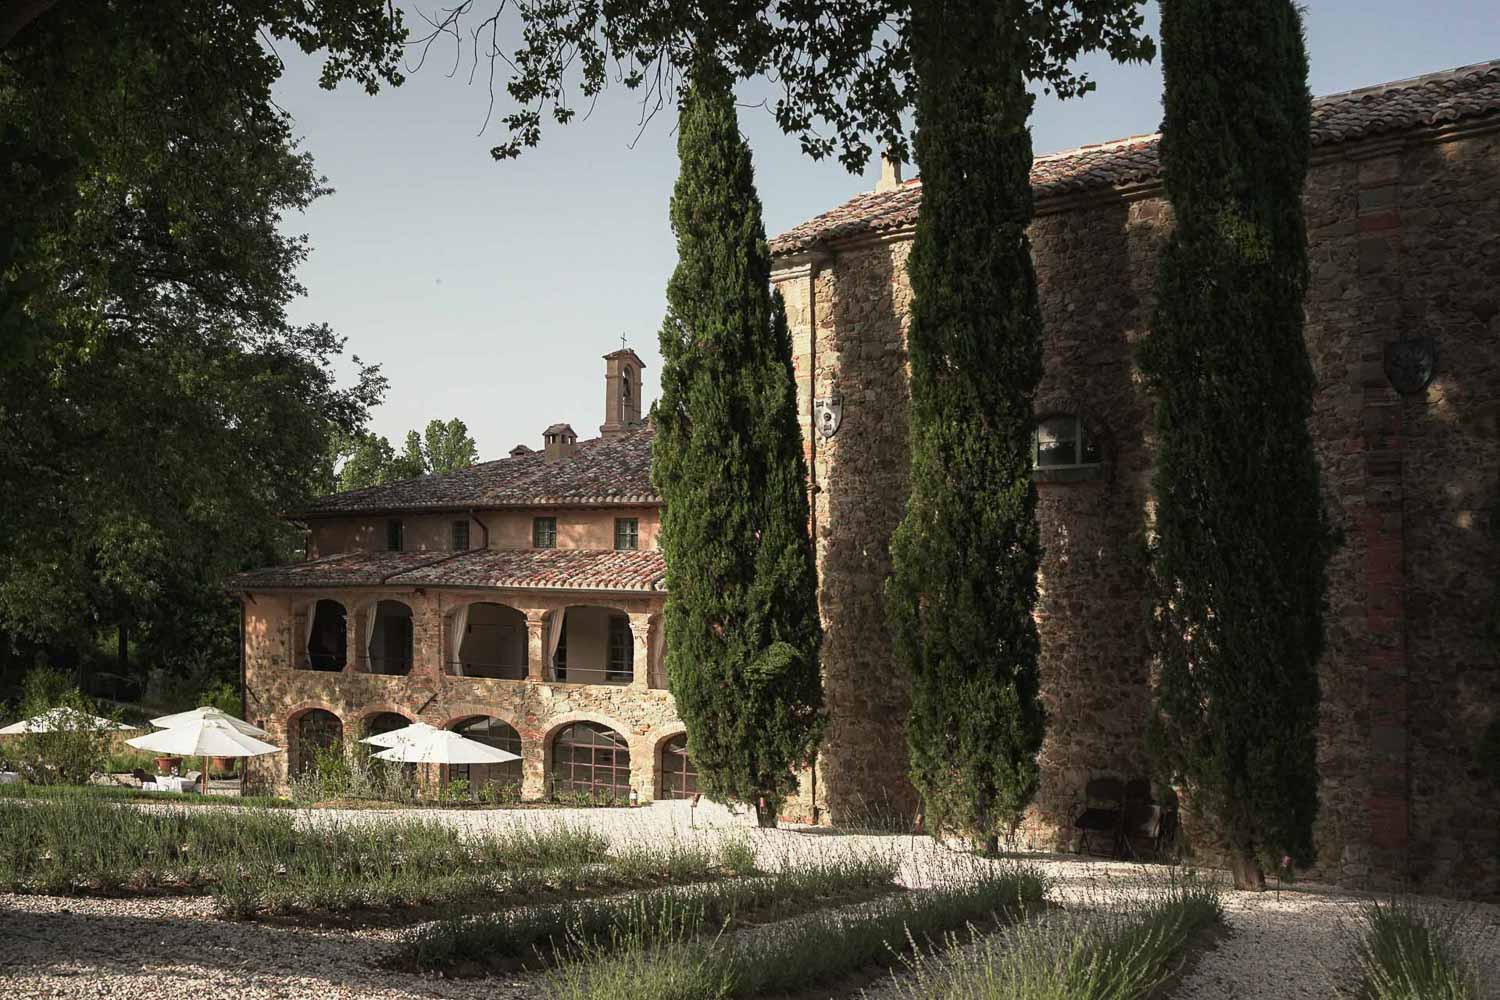 Vocabolo Moscatelli is adjacent to a lush centuries-old forest